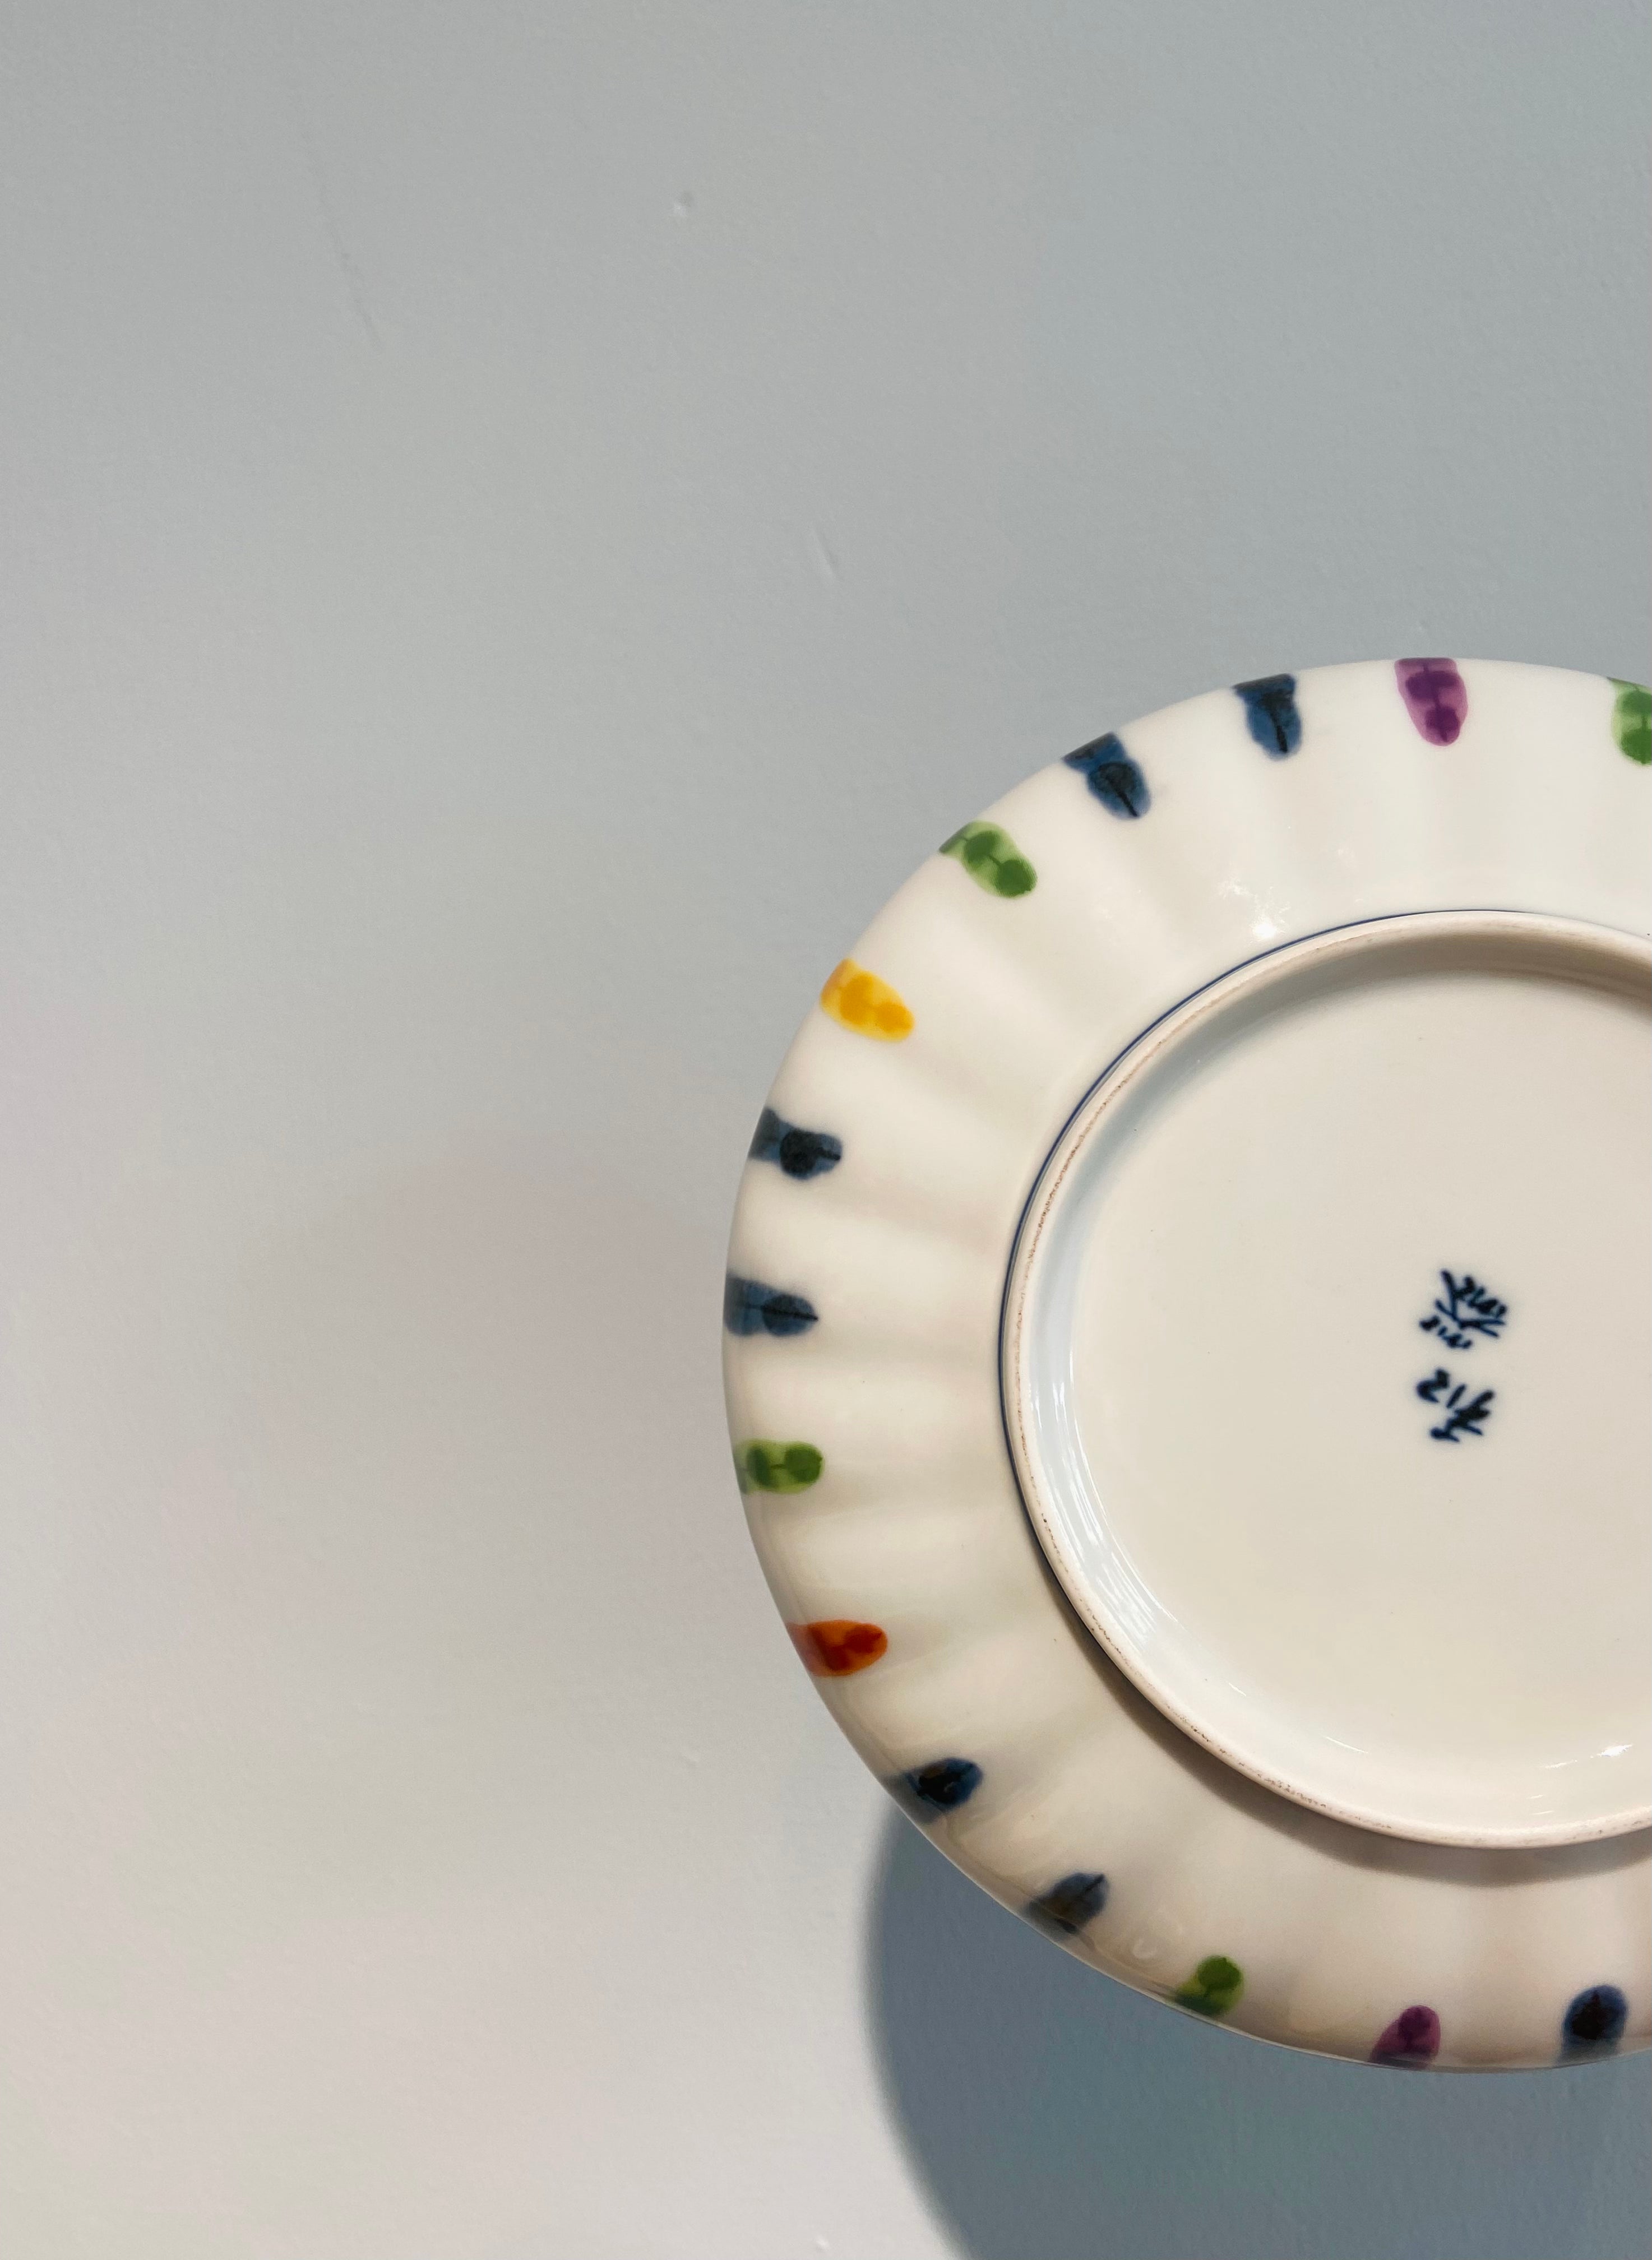 Hand painted plate with multicolored stripes